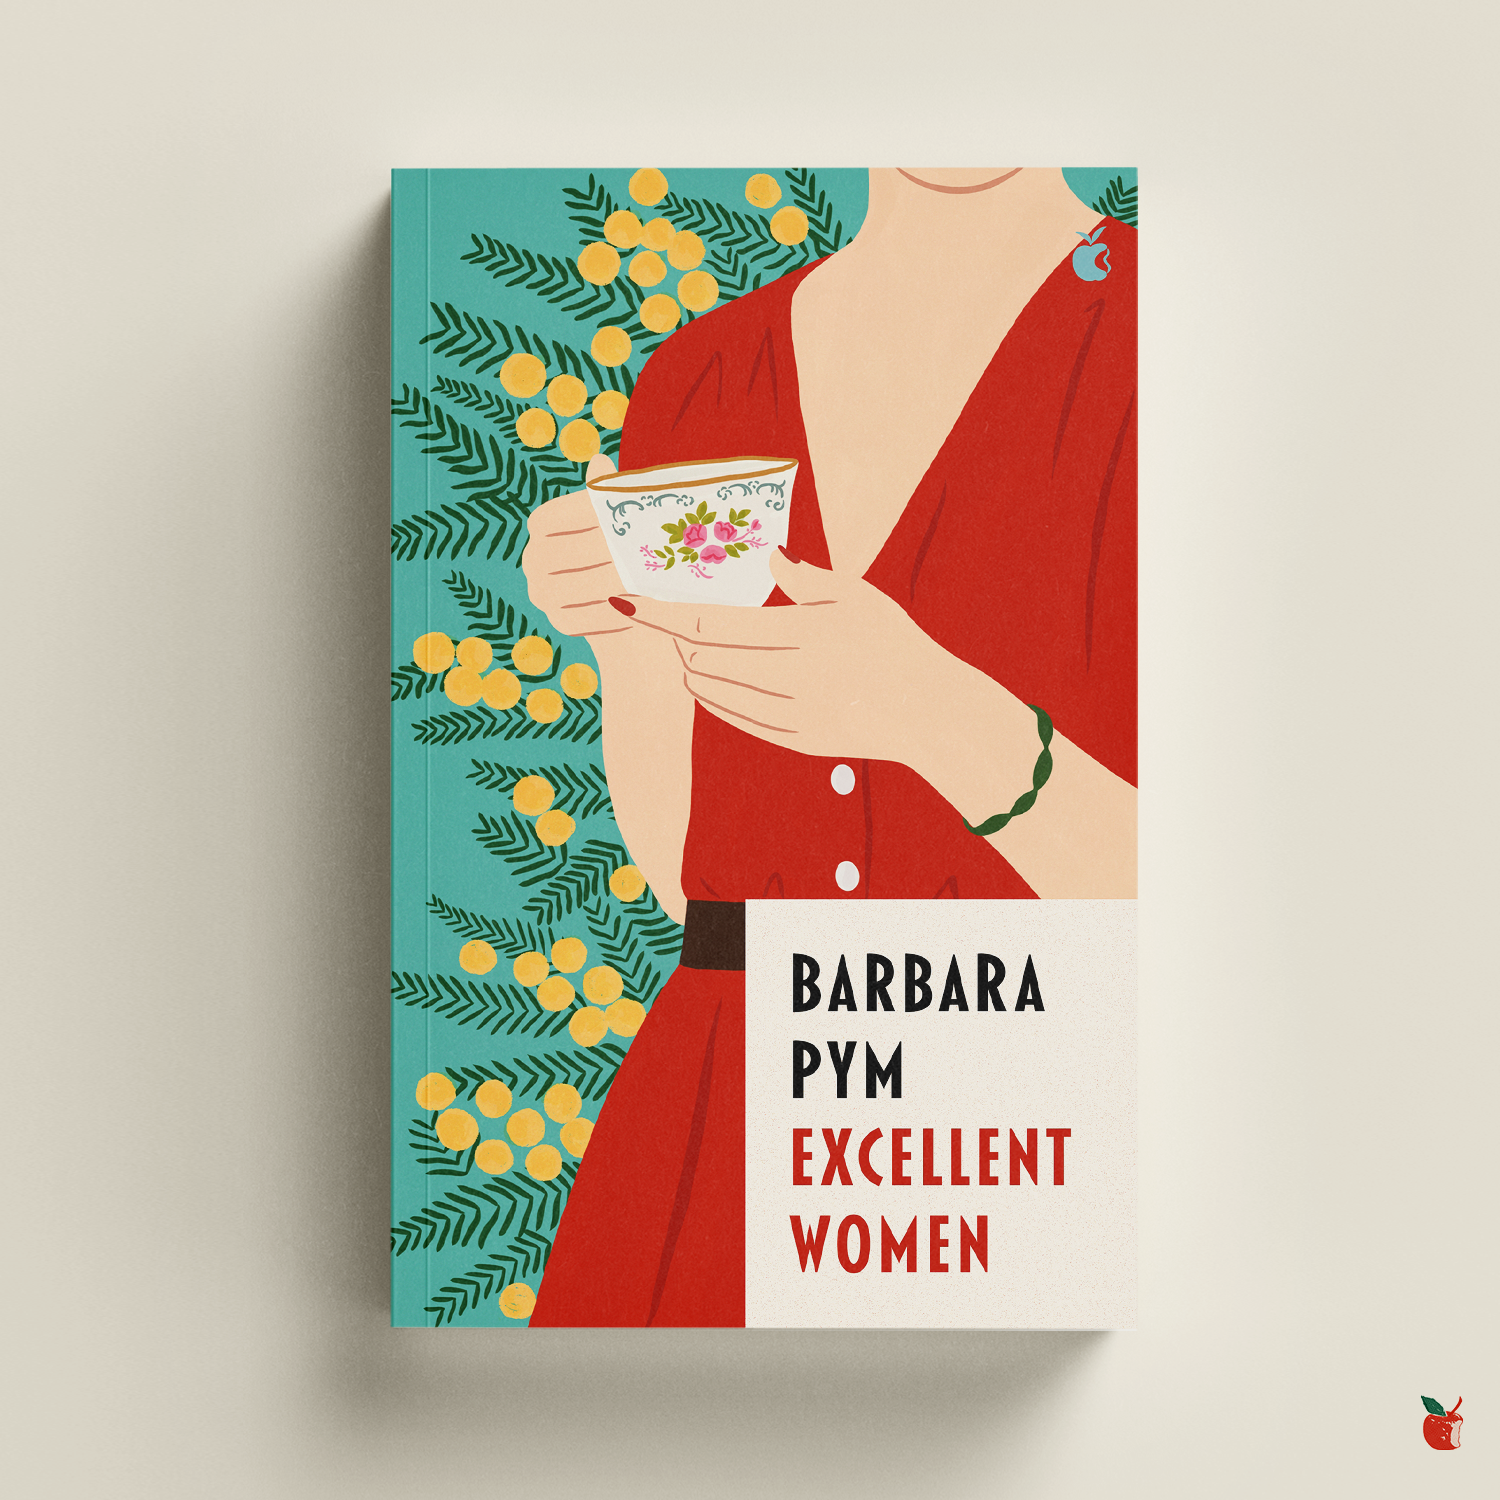 Excellent Women by Barbara Pym